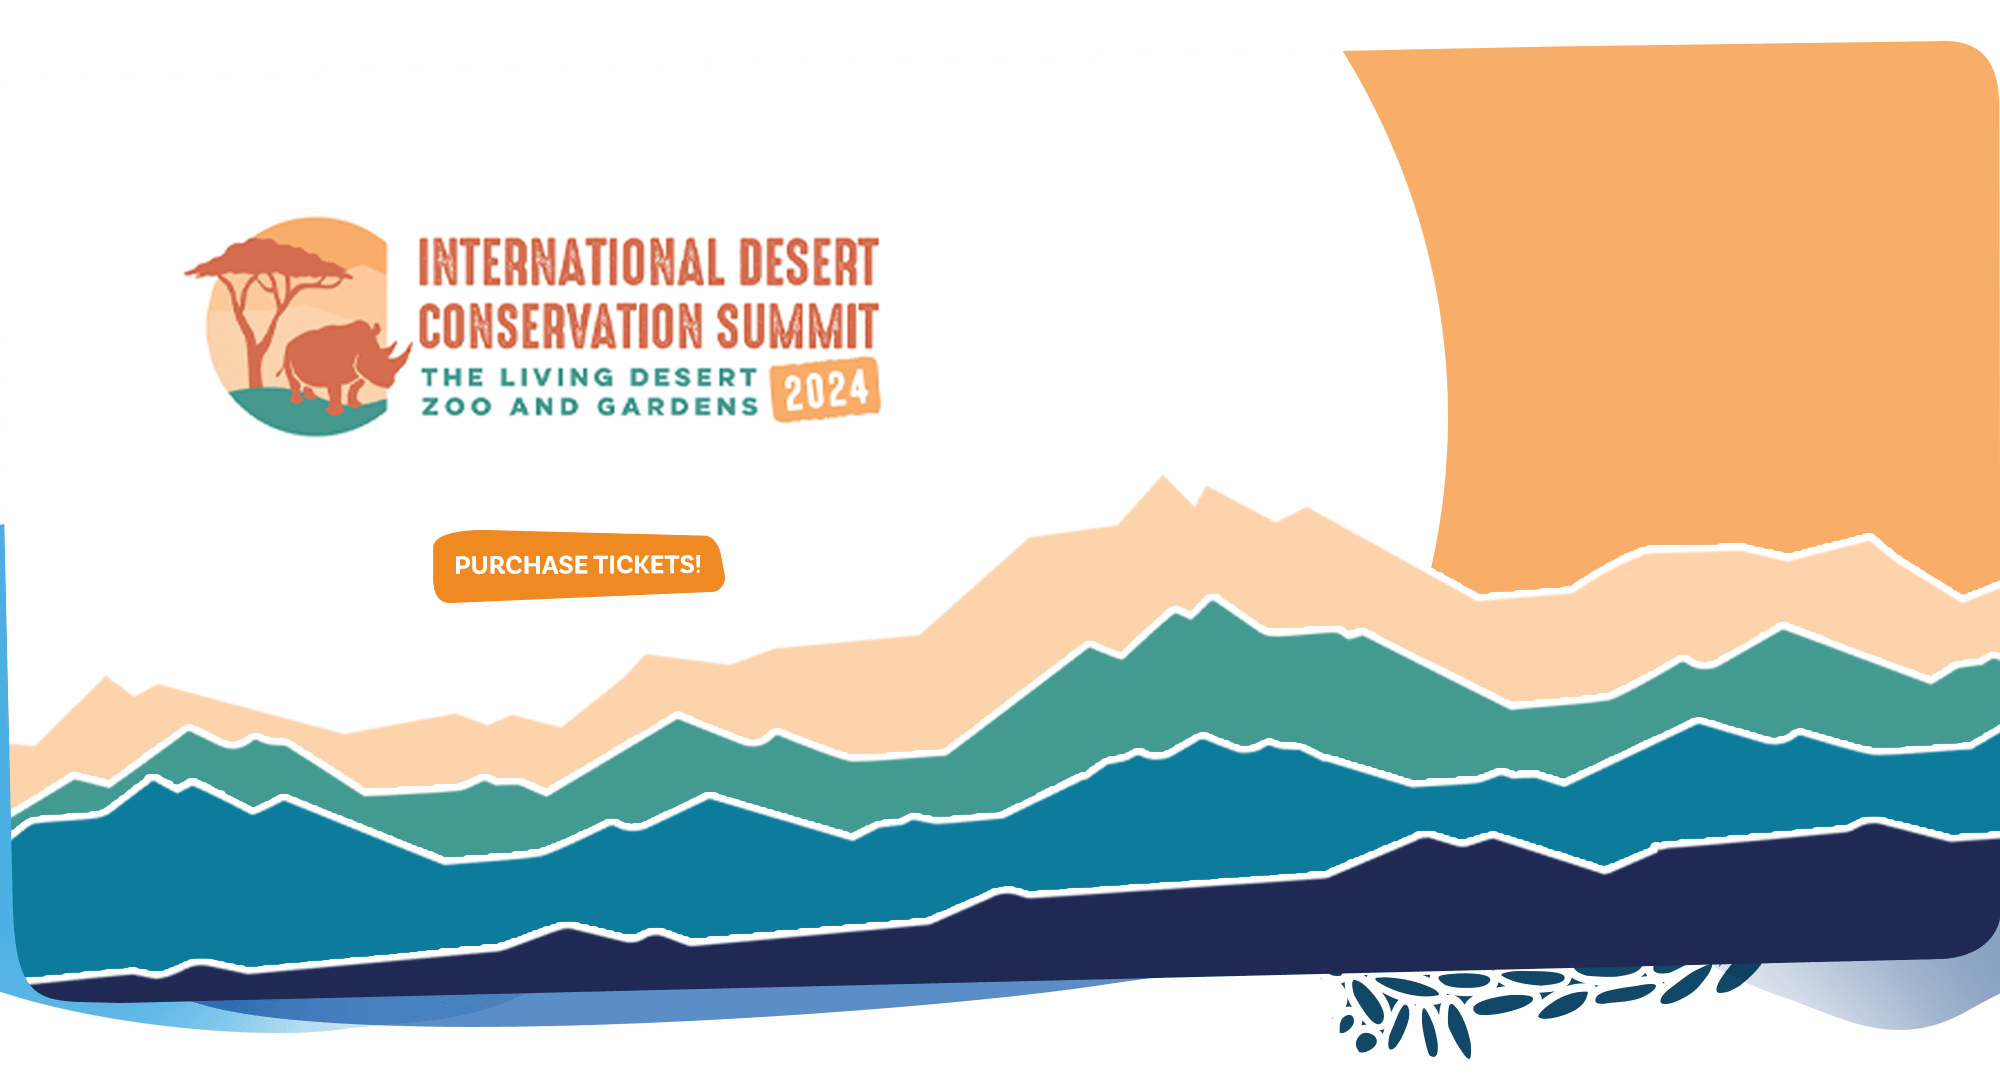 International Desert Conservation Summit  click to learn more